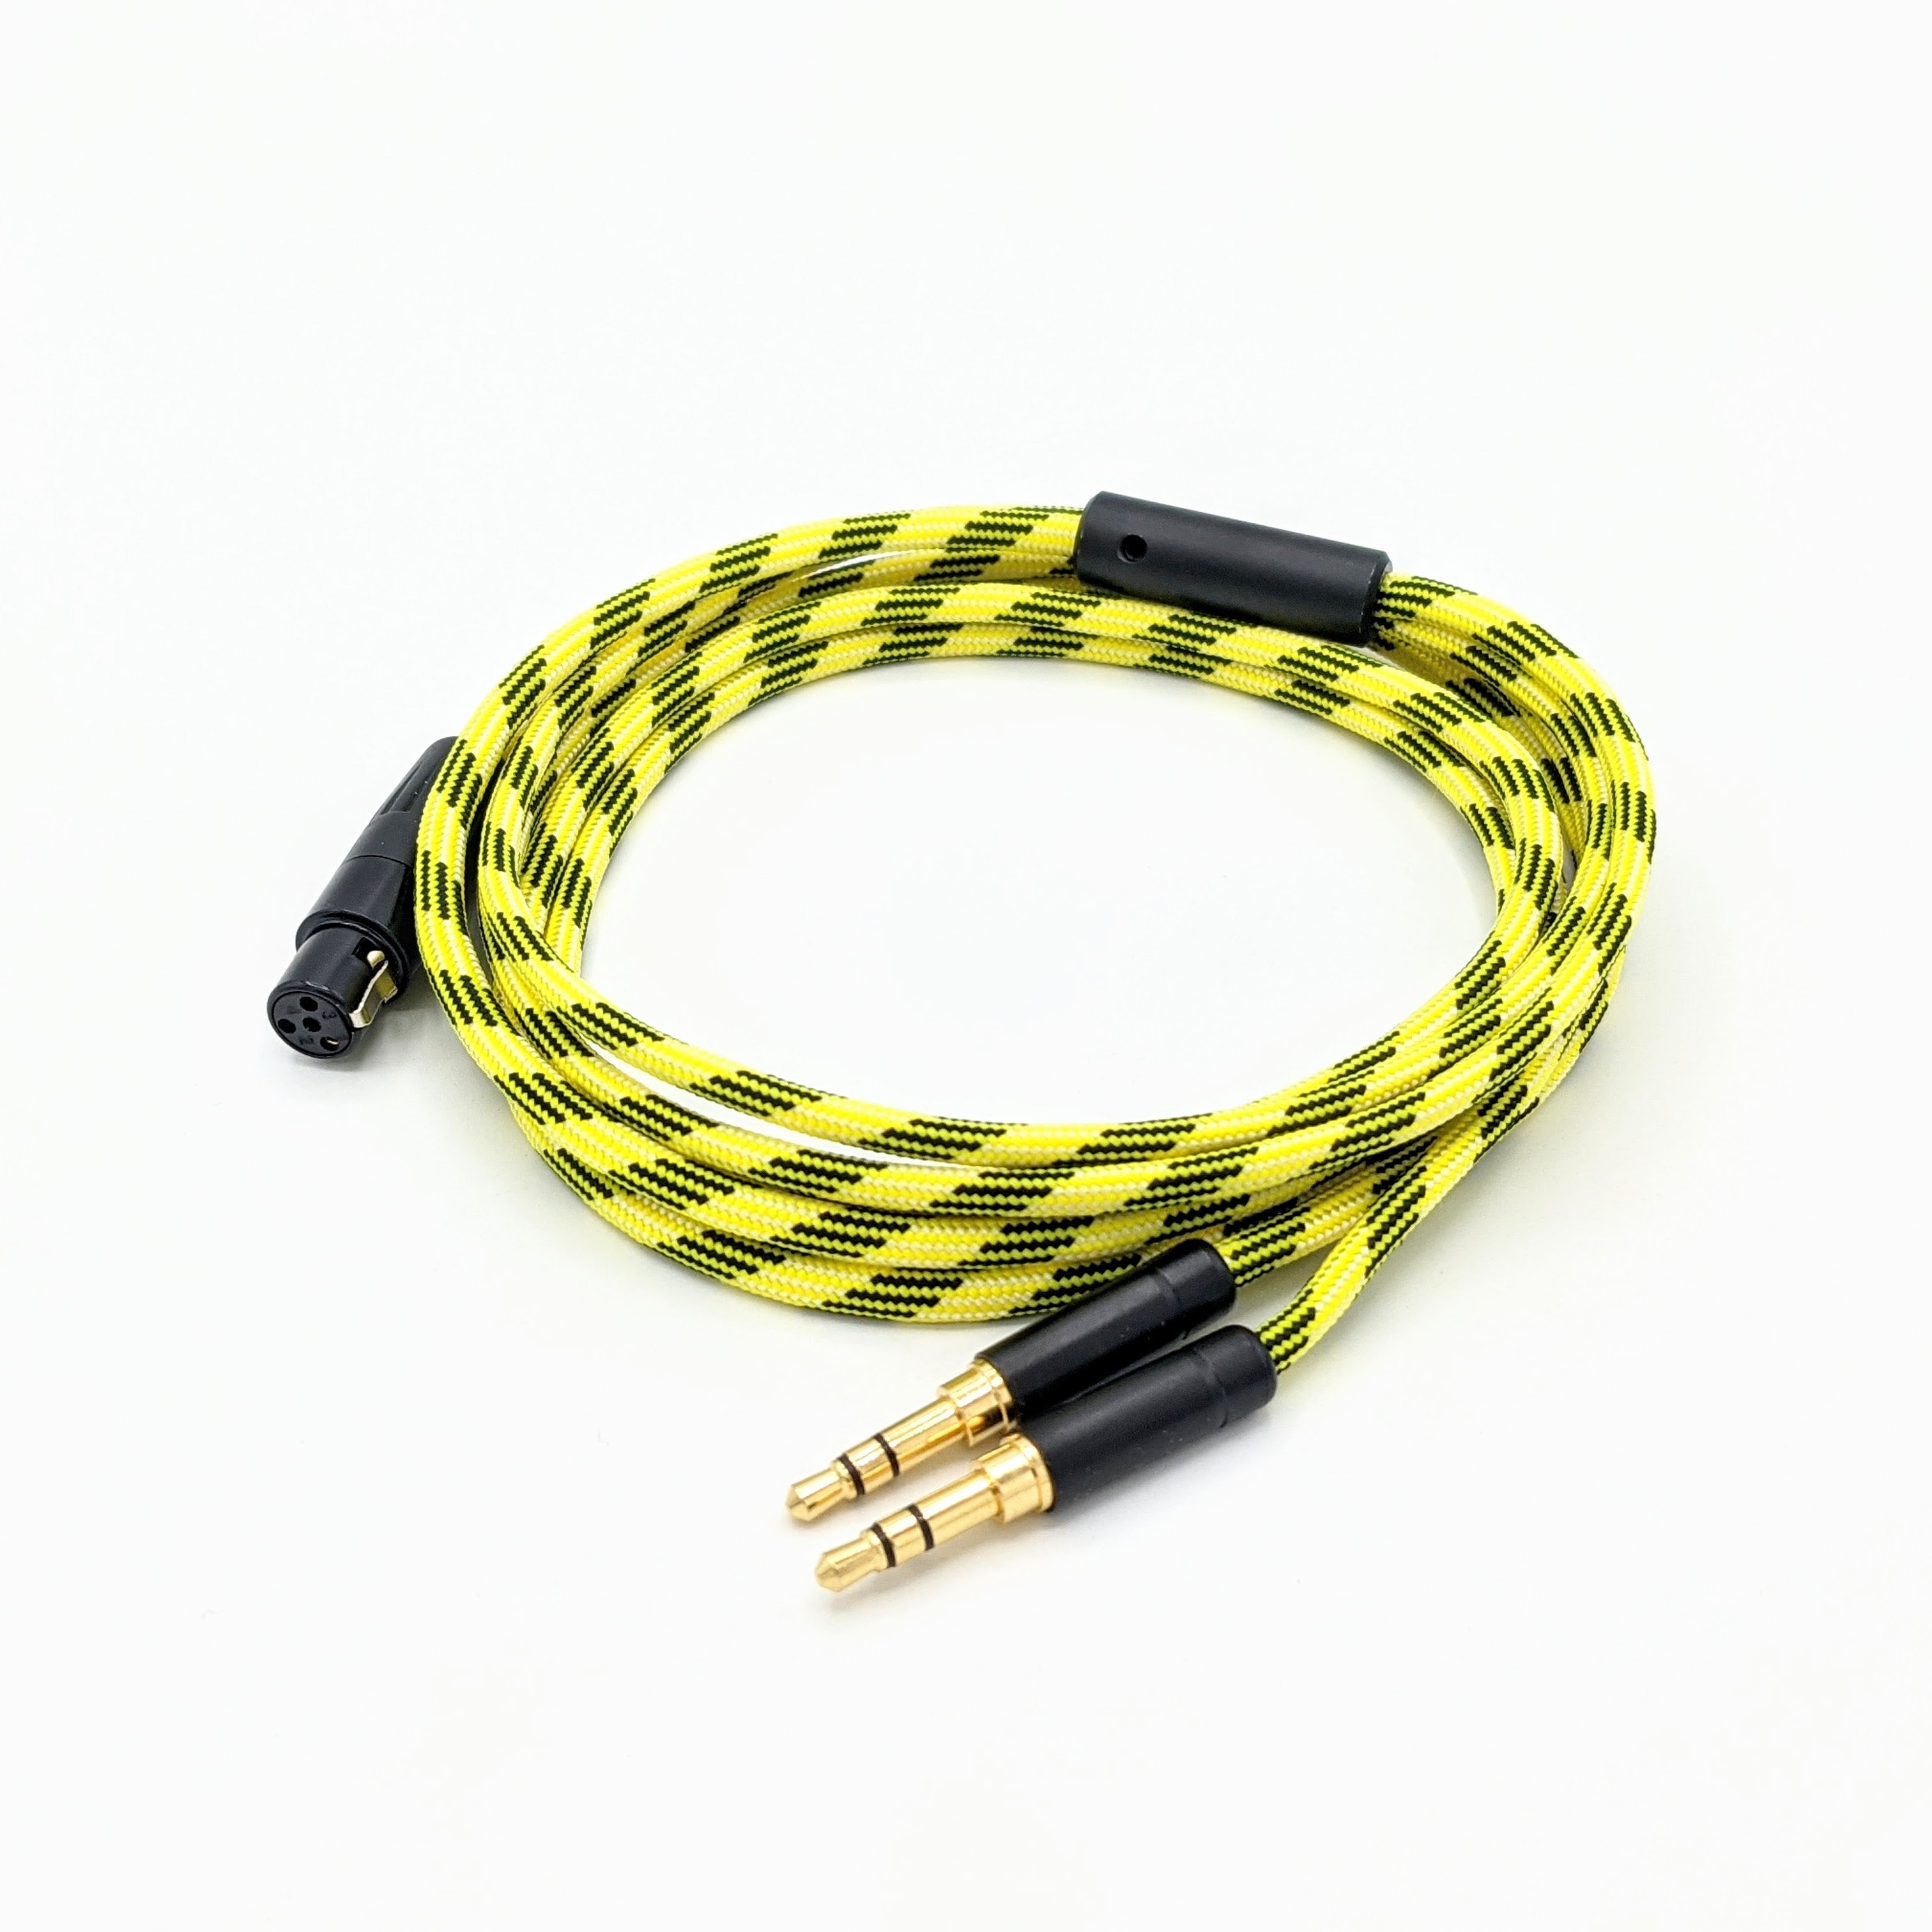 CST-HC-9: Custom Dual 3.5mm TRS Balanced Headphone Cable for Hifiman, Focal, Meze 109 Pro, Meze Liric, and more